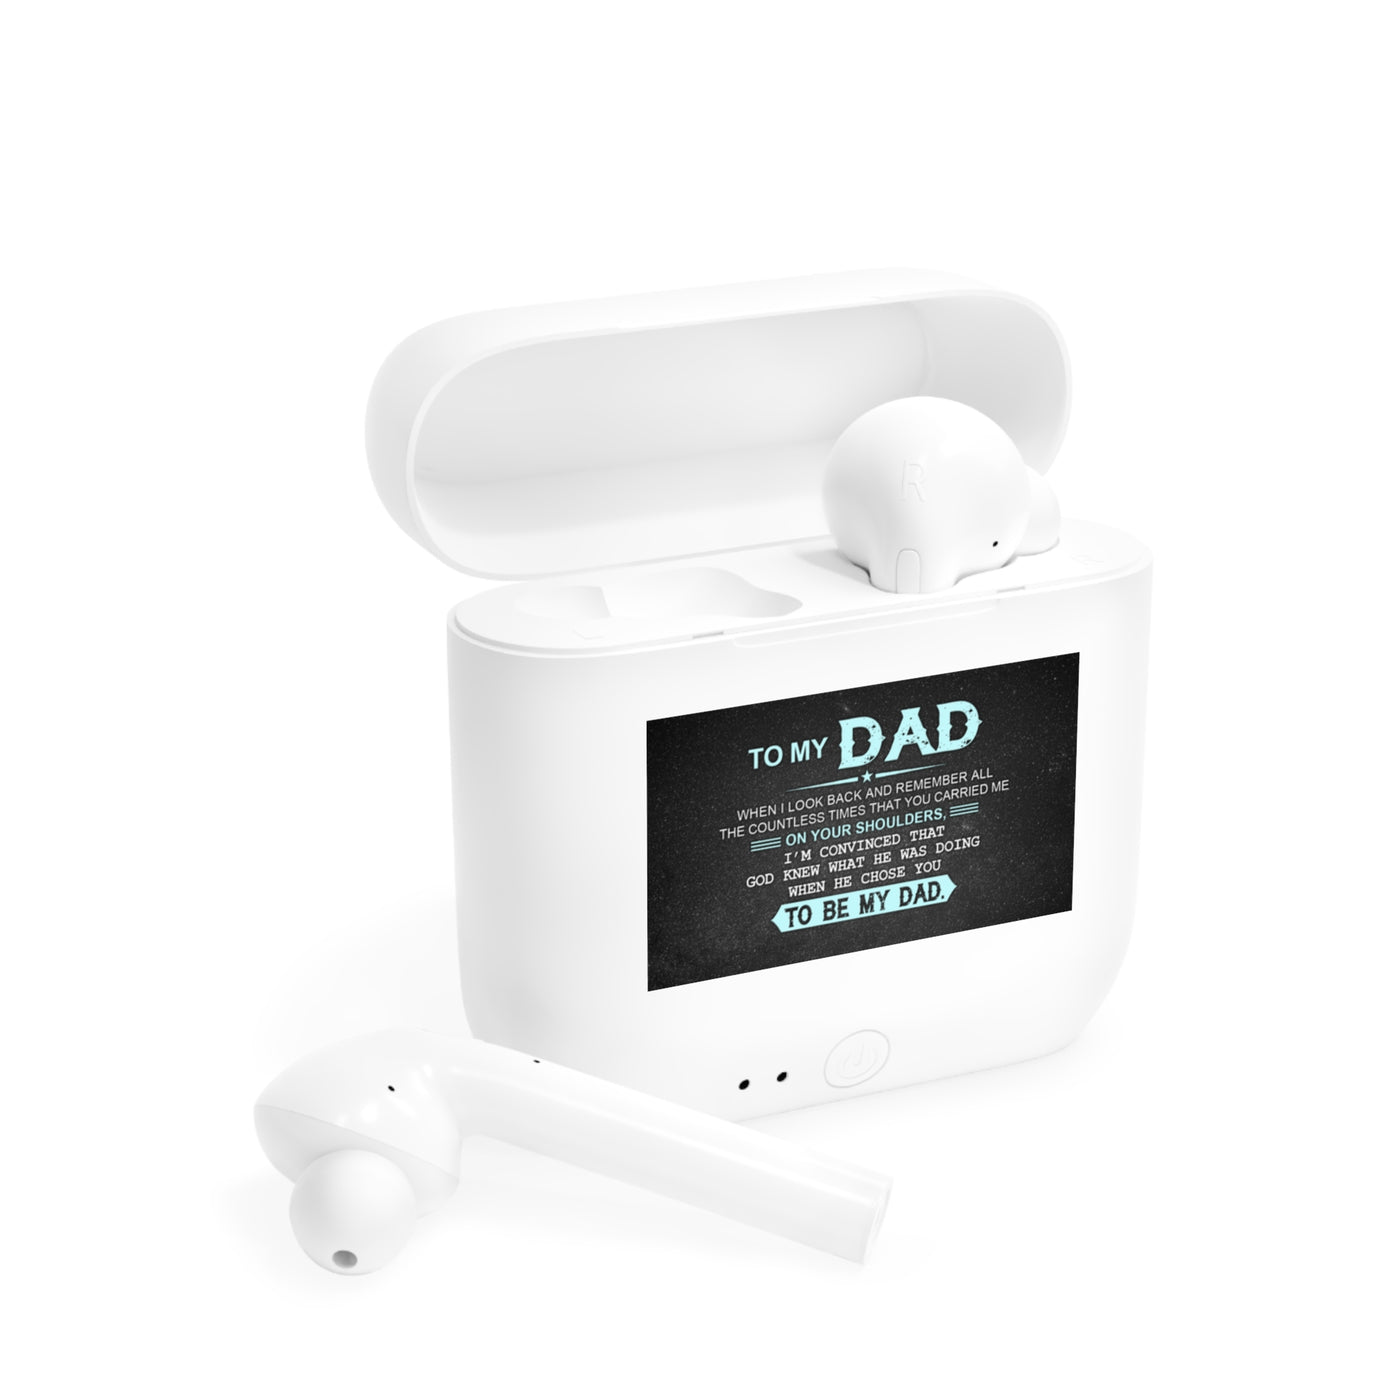 Dad's Strength Edition: Wireless Earbuds with a Heartfelt Message